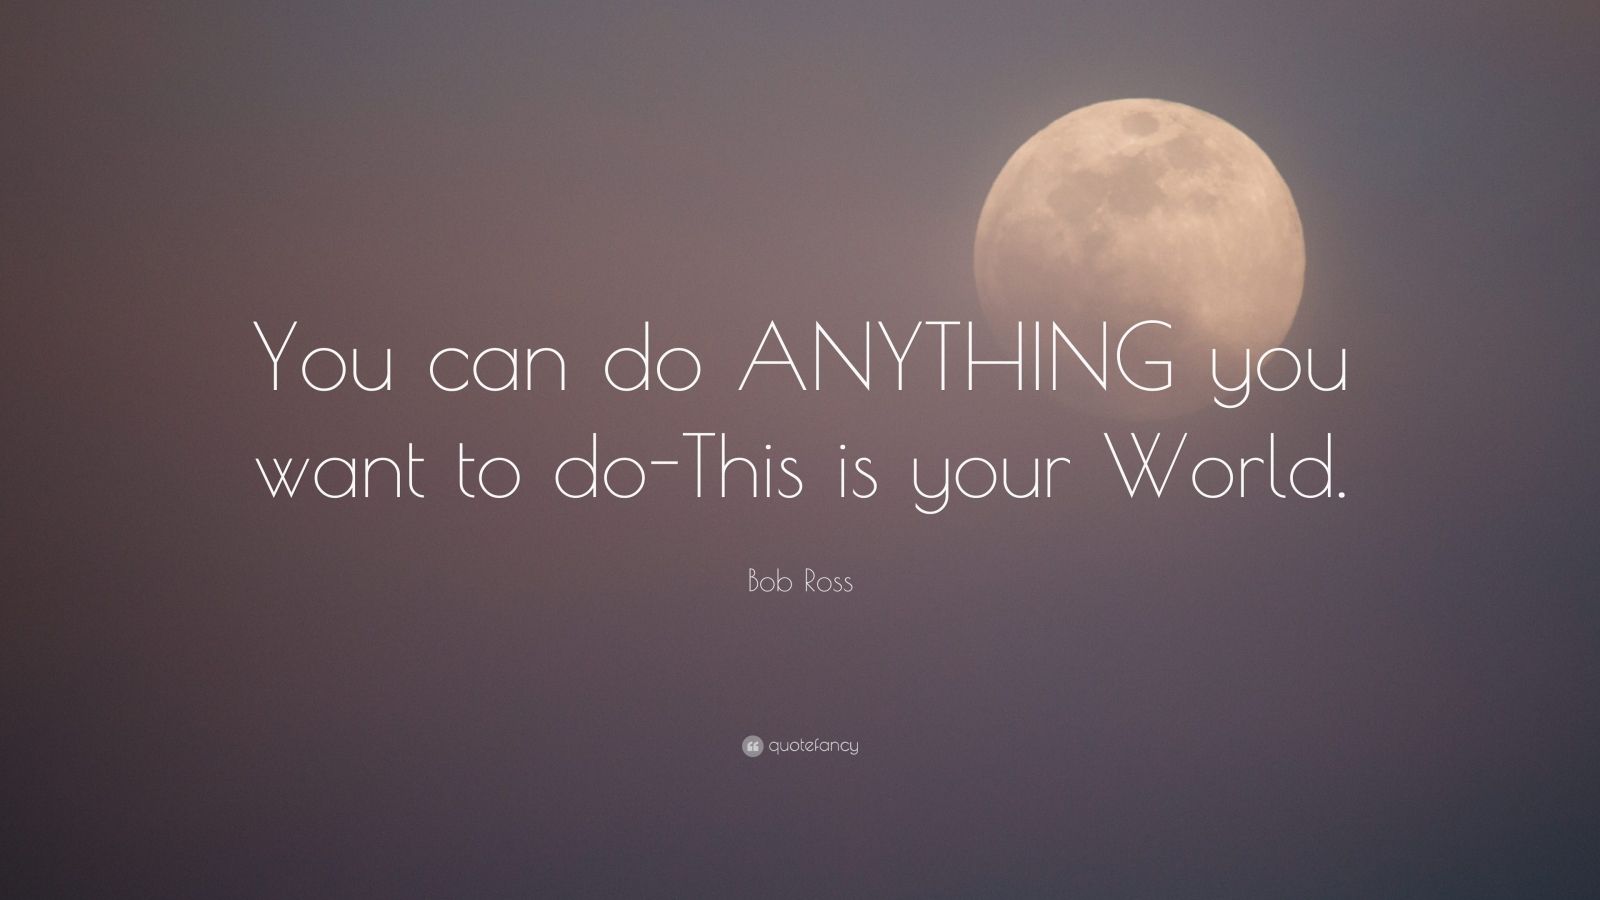 Bob Ross Quote: “You can do ANYTHING you want to do-This is your World